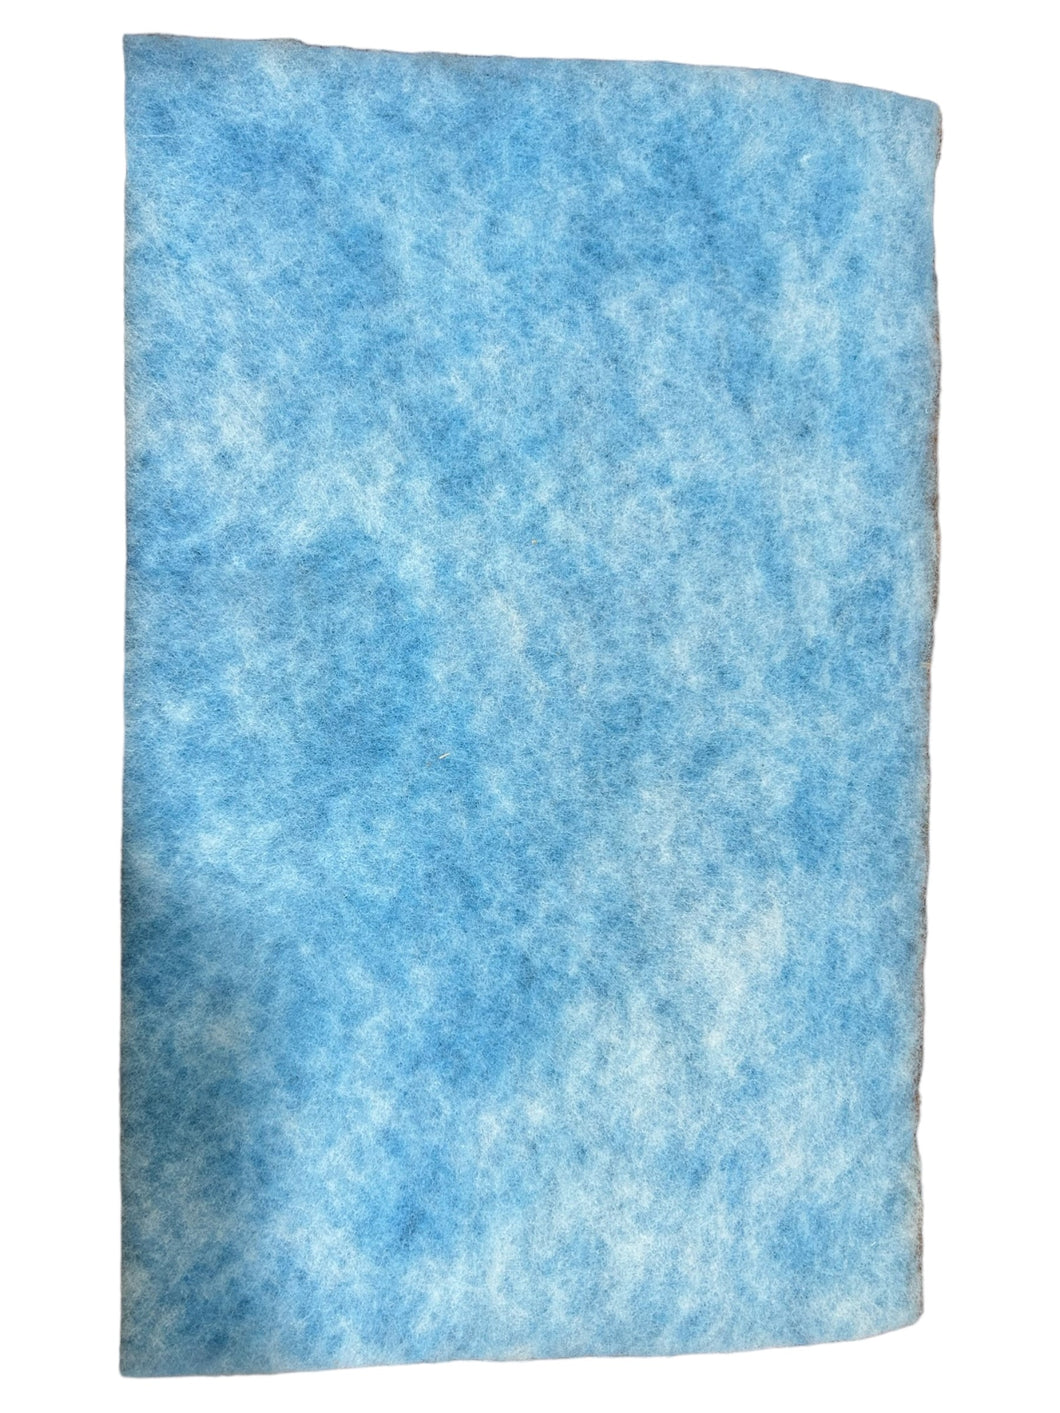 Air Handler, 5W100, Air Filter Pad, 16x25x1, Nominal Filter Size, Polyester, Surface Tackifier, Blue/White - FreemanLiquidators - [product_description]